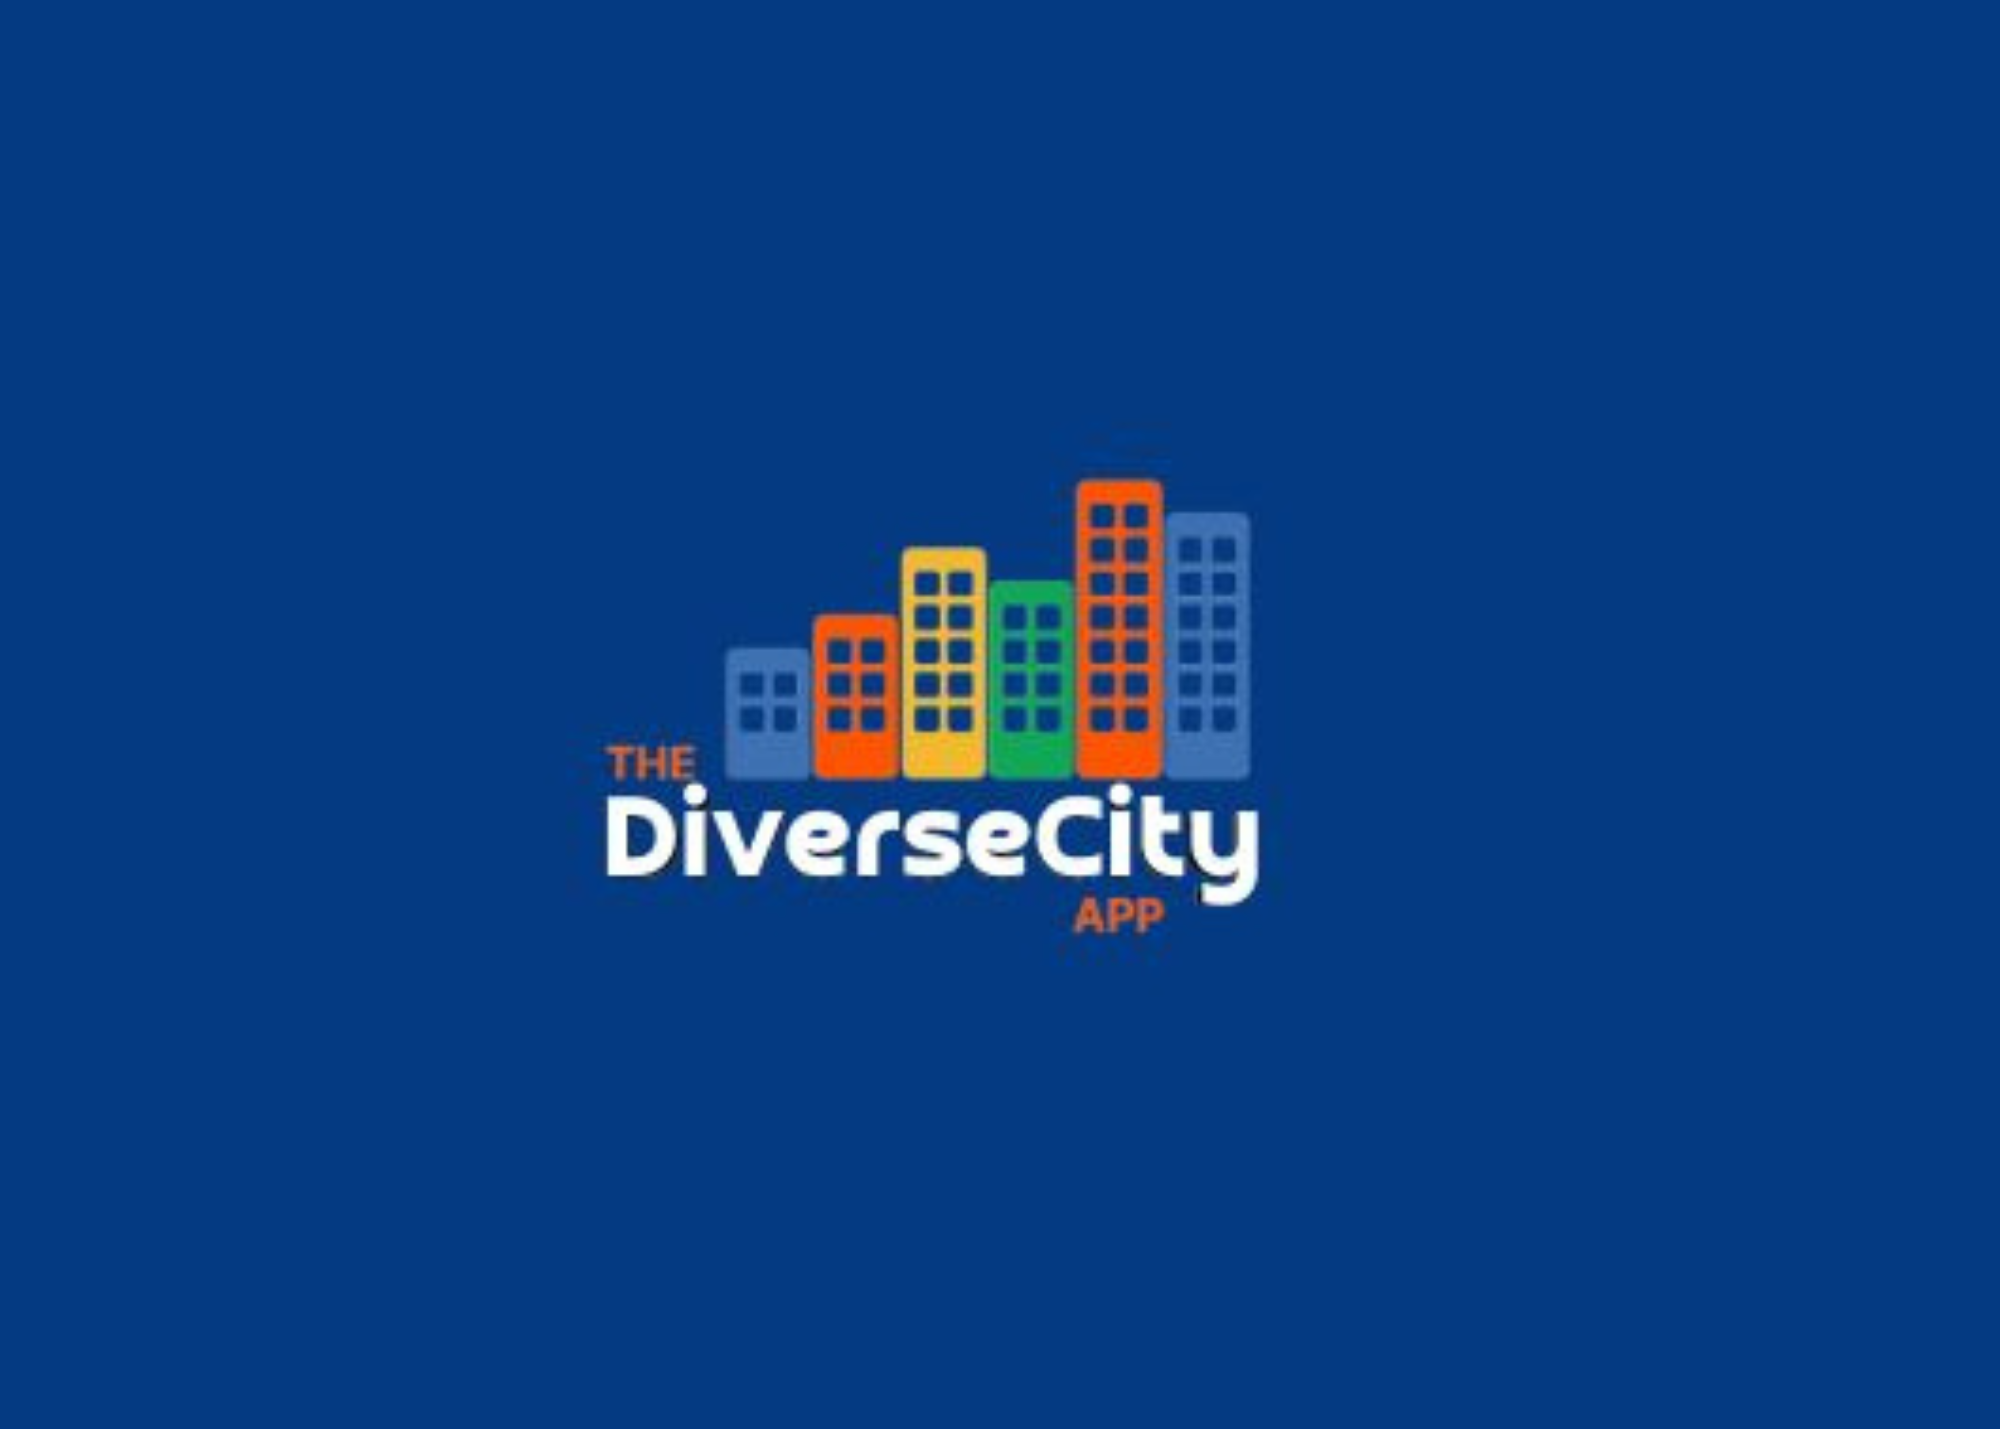 The DiverseCity App Expands C-Suite with Mary Johnson as its new CIO